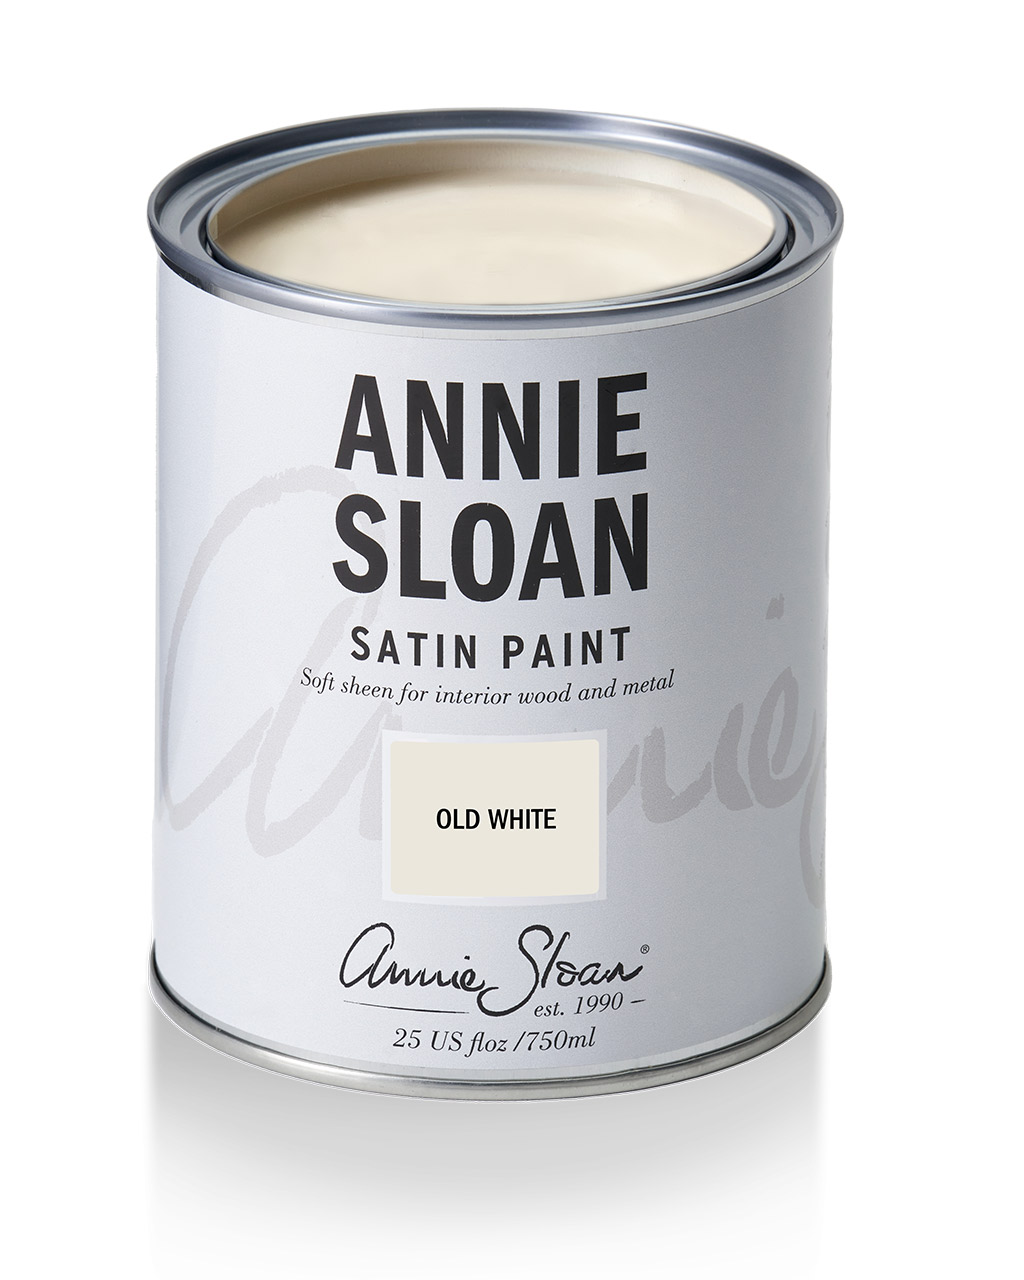 Product shot of Annie Sloan Satin Paint tin in Old White